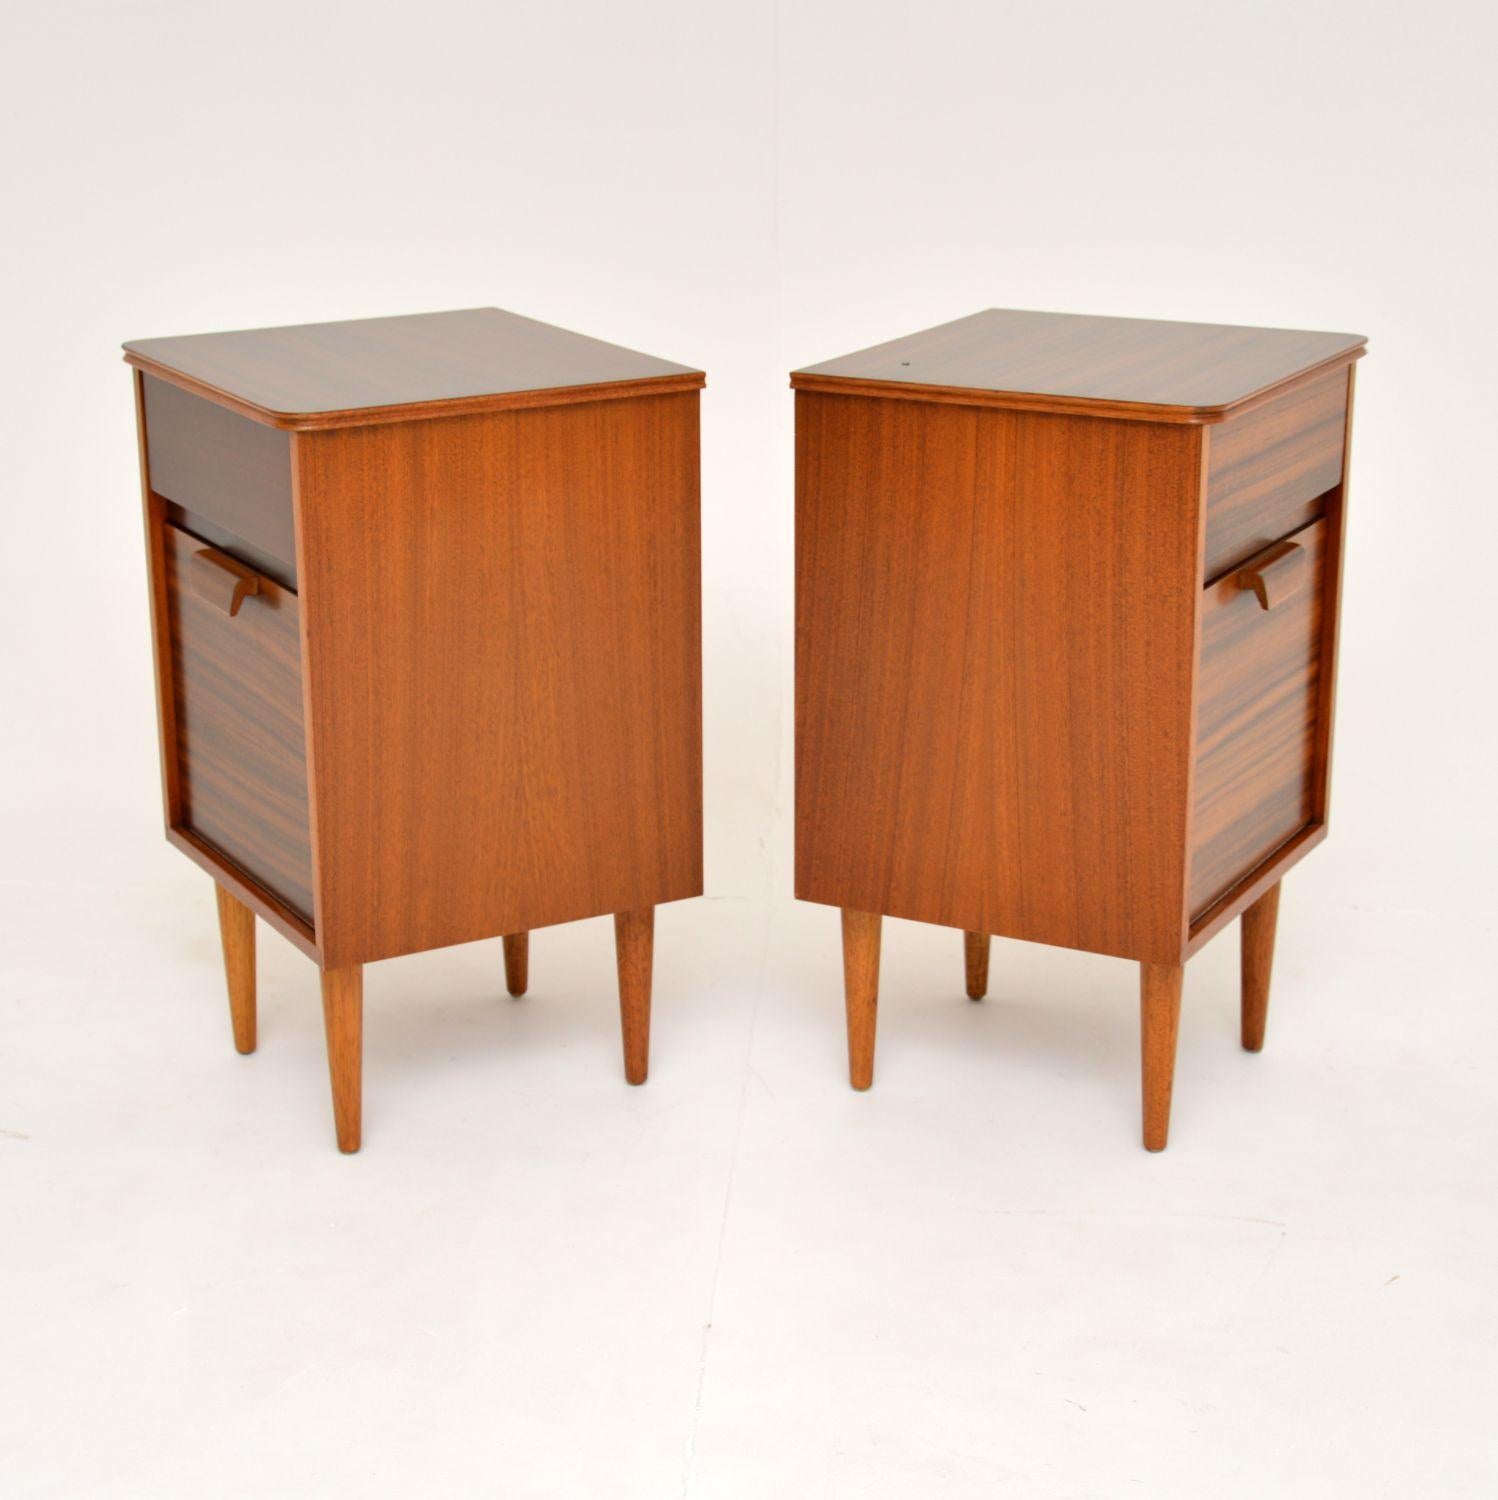 20th Century 1960's Pair of Vintage Walnut Bedside Cabinets by Uniflex